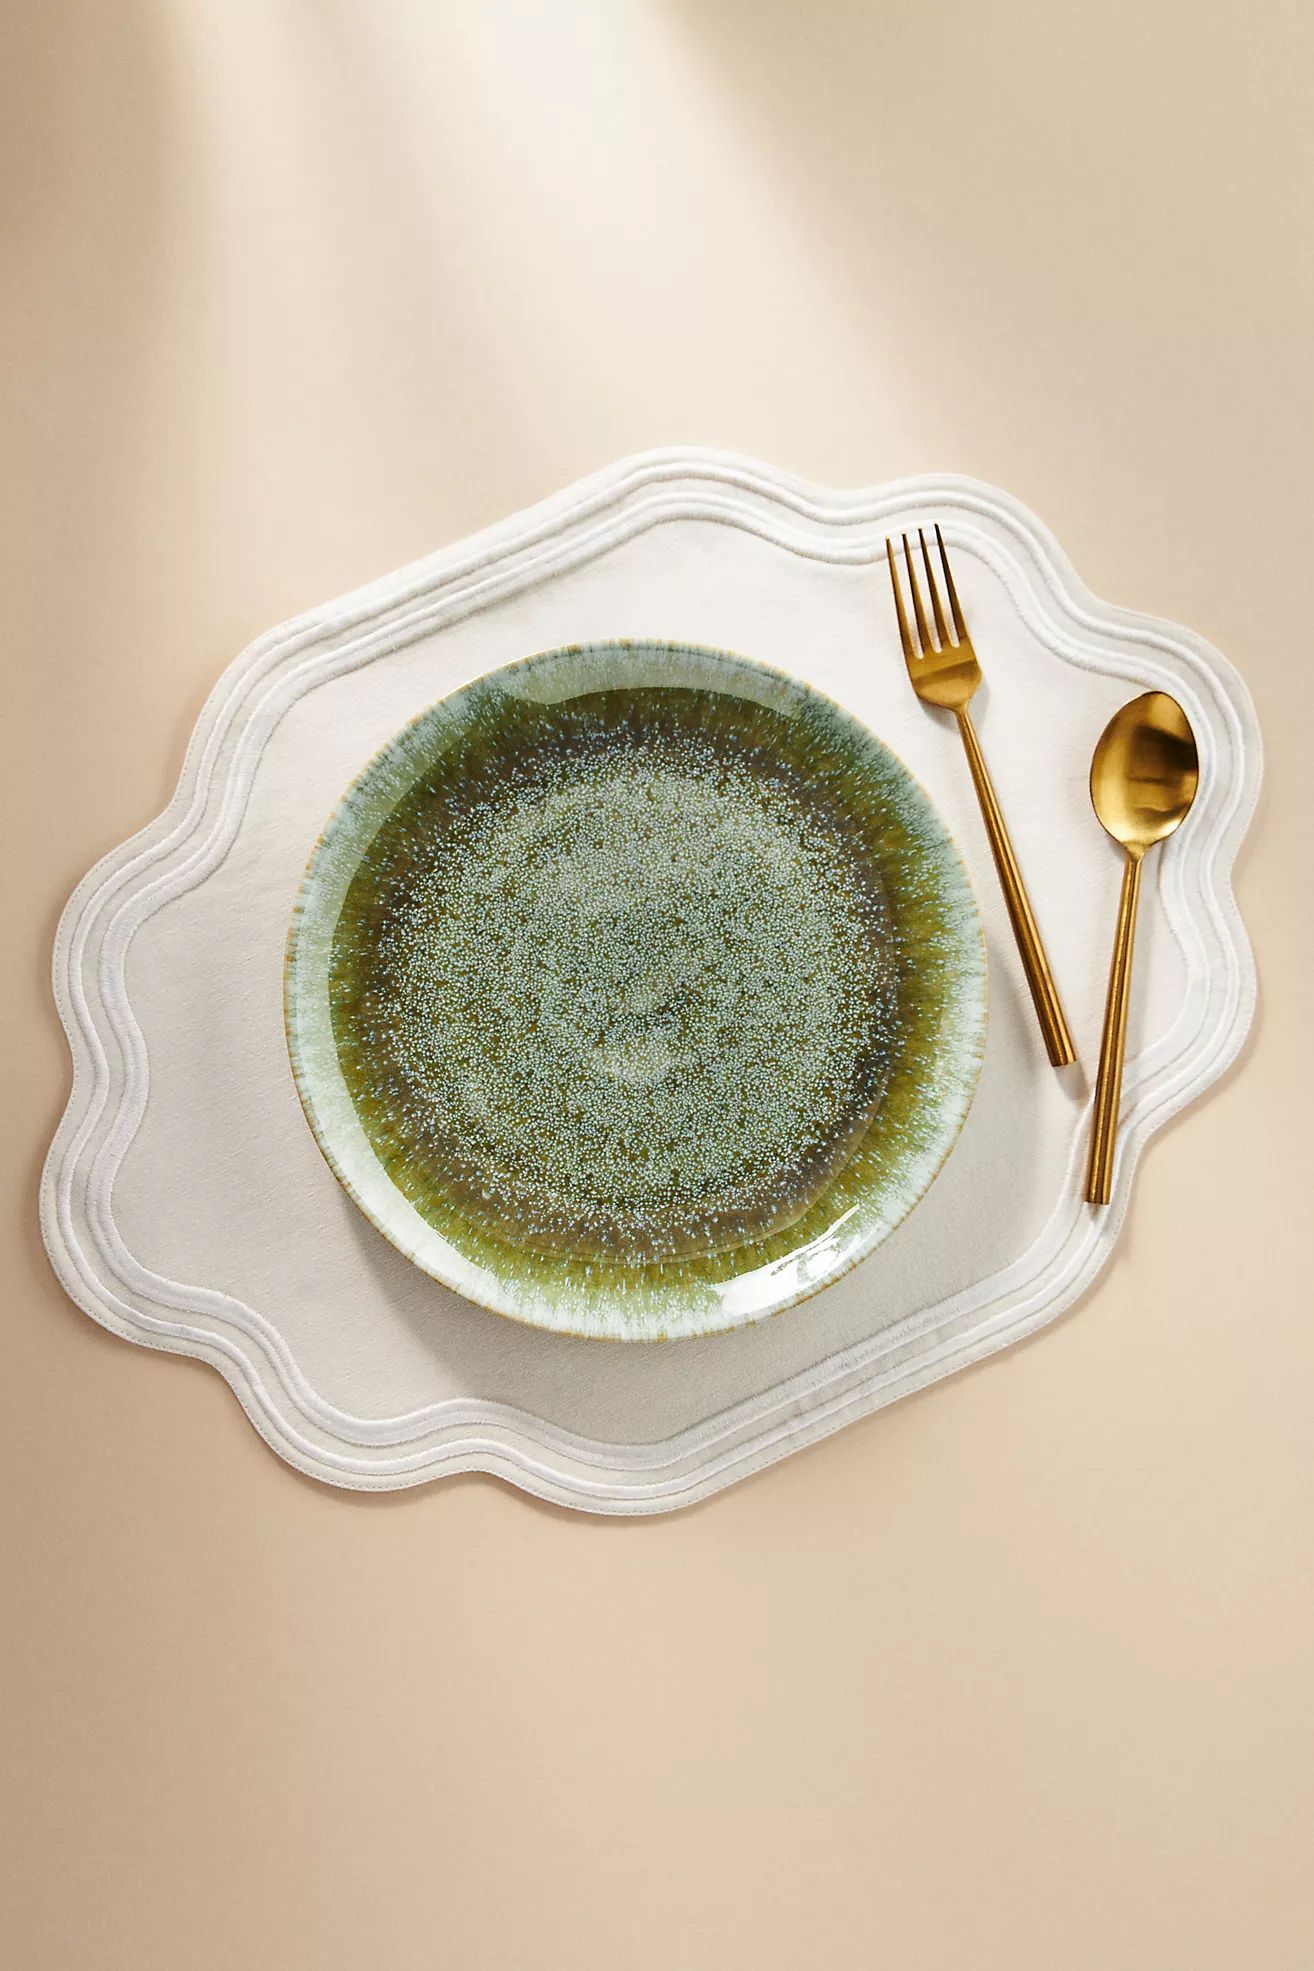 Madeline Placemat | Anthropologie (US)